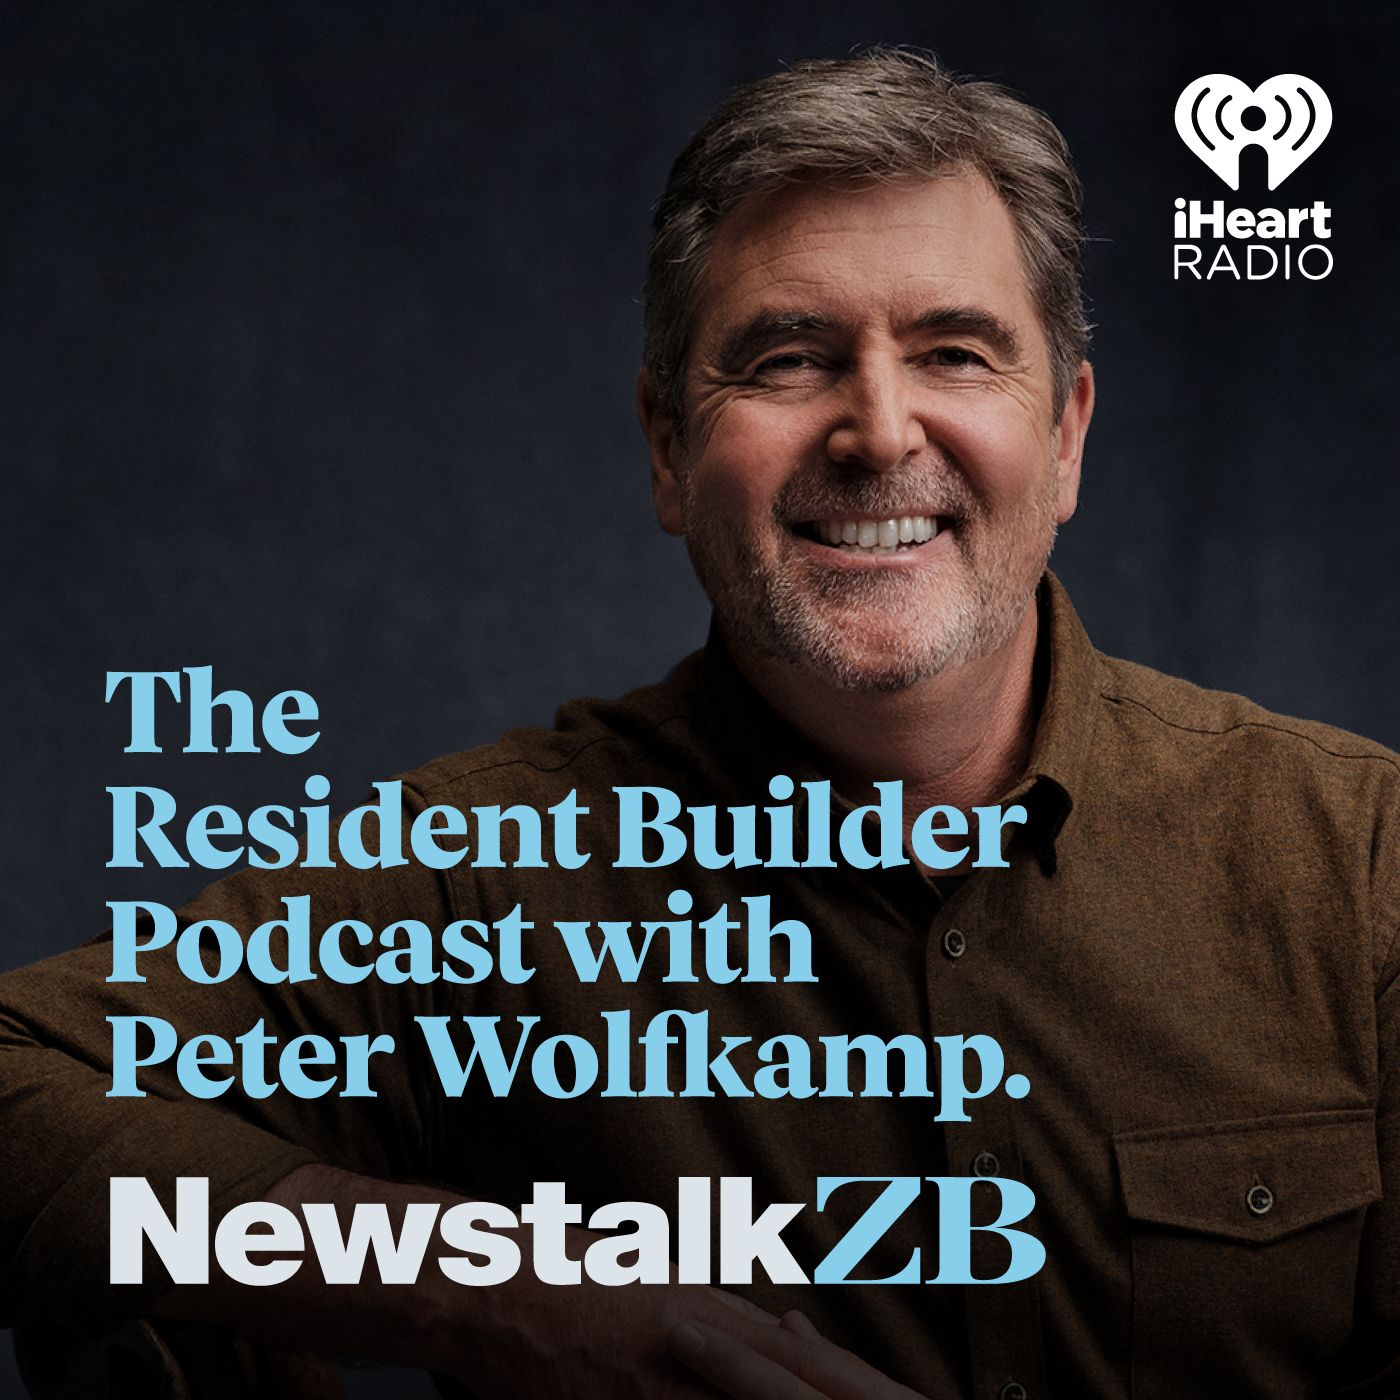 The Resident Builder Podcast – 15 May 2022